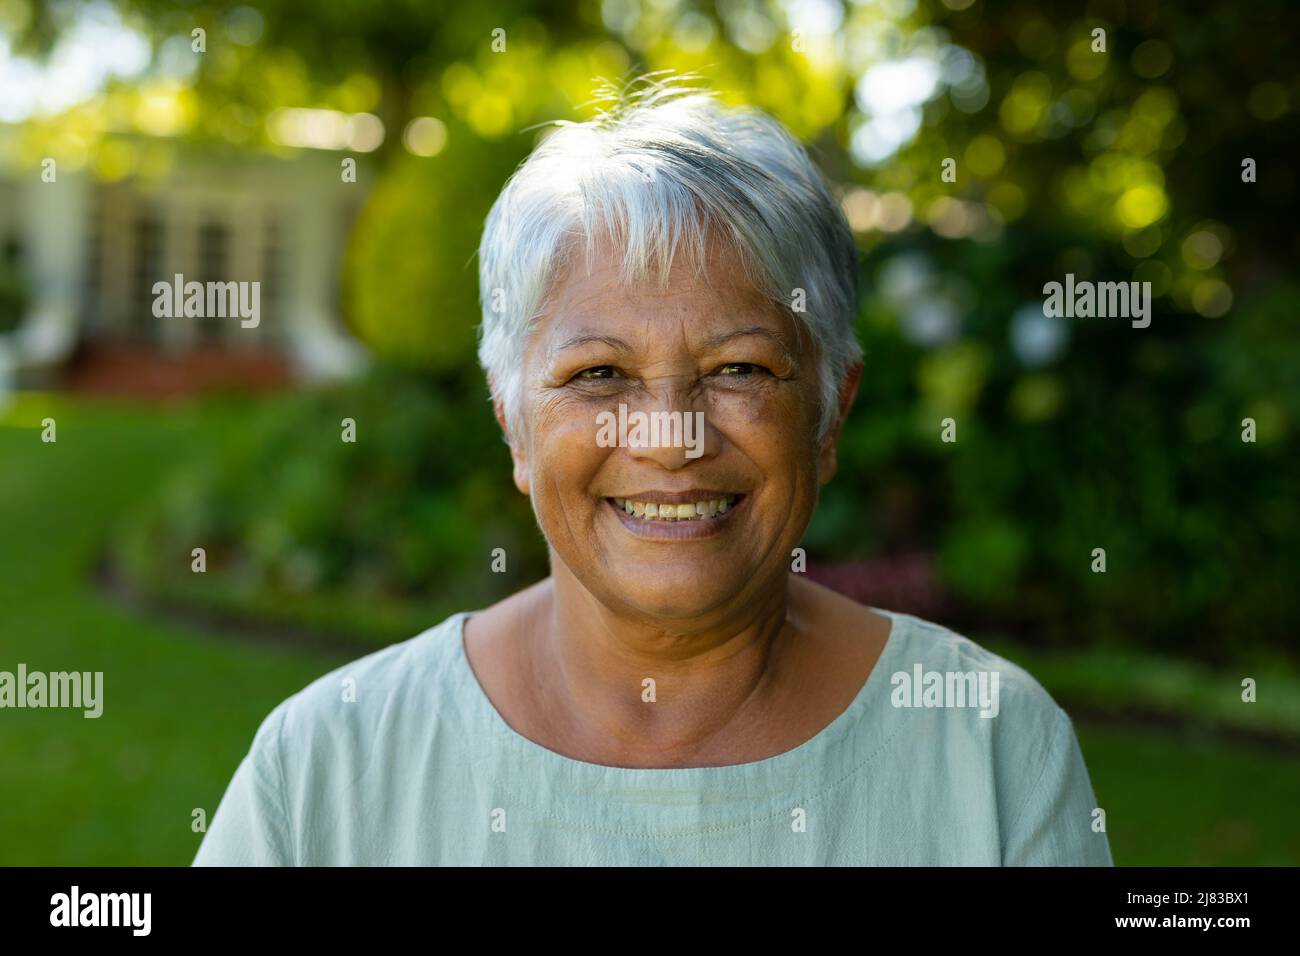 Close-up portrait of smiling biracial senior woman with short gray hair against trees in park Stock Photo